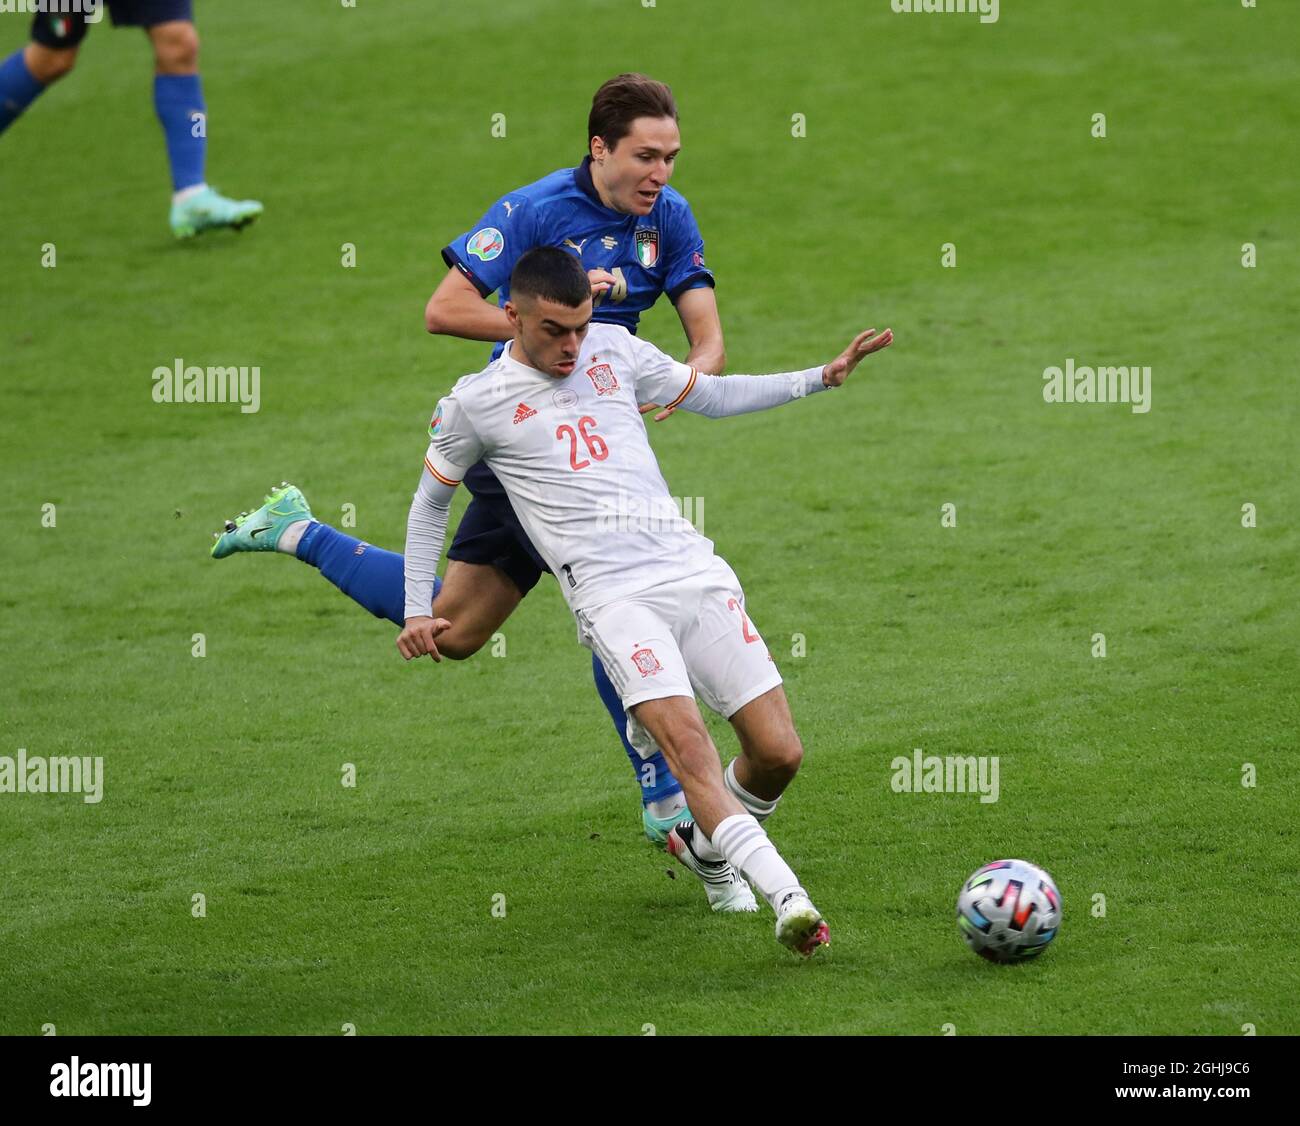 London, England, 6th July 2021. Federico Chiesa of Italy tackles Pedri of Spain  during the UEFA Euro 2020 match at Wembley Stadium, London. Picture credit should read: David Klein / Sportimage via PA Images Stock Photo